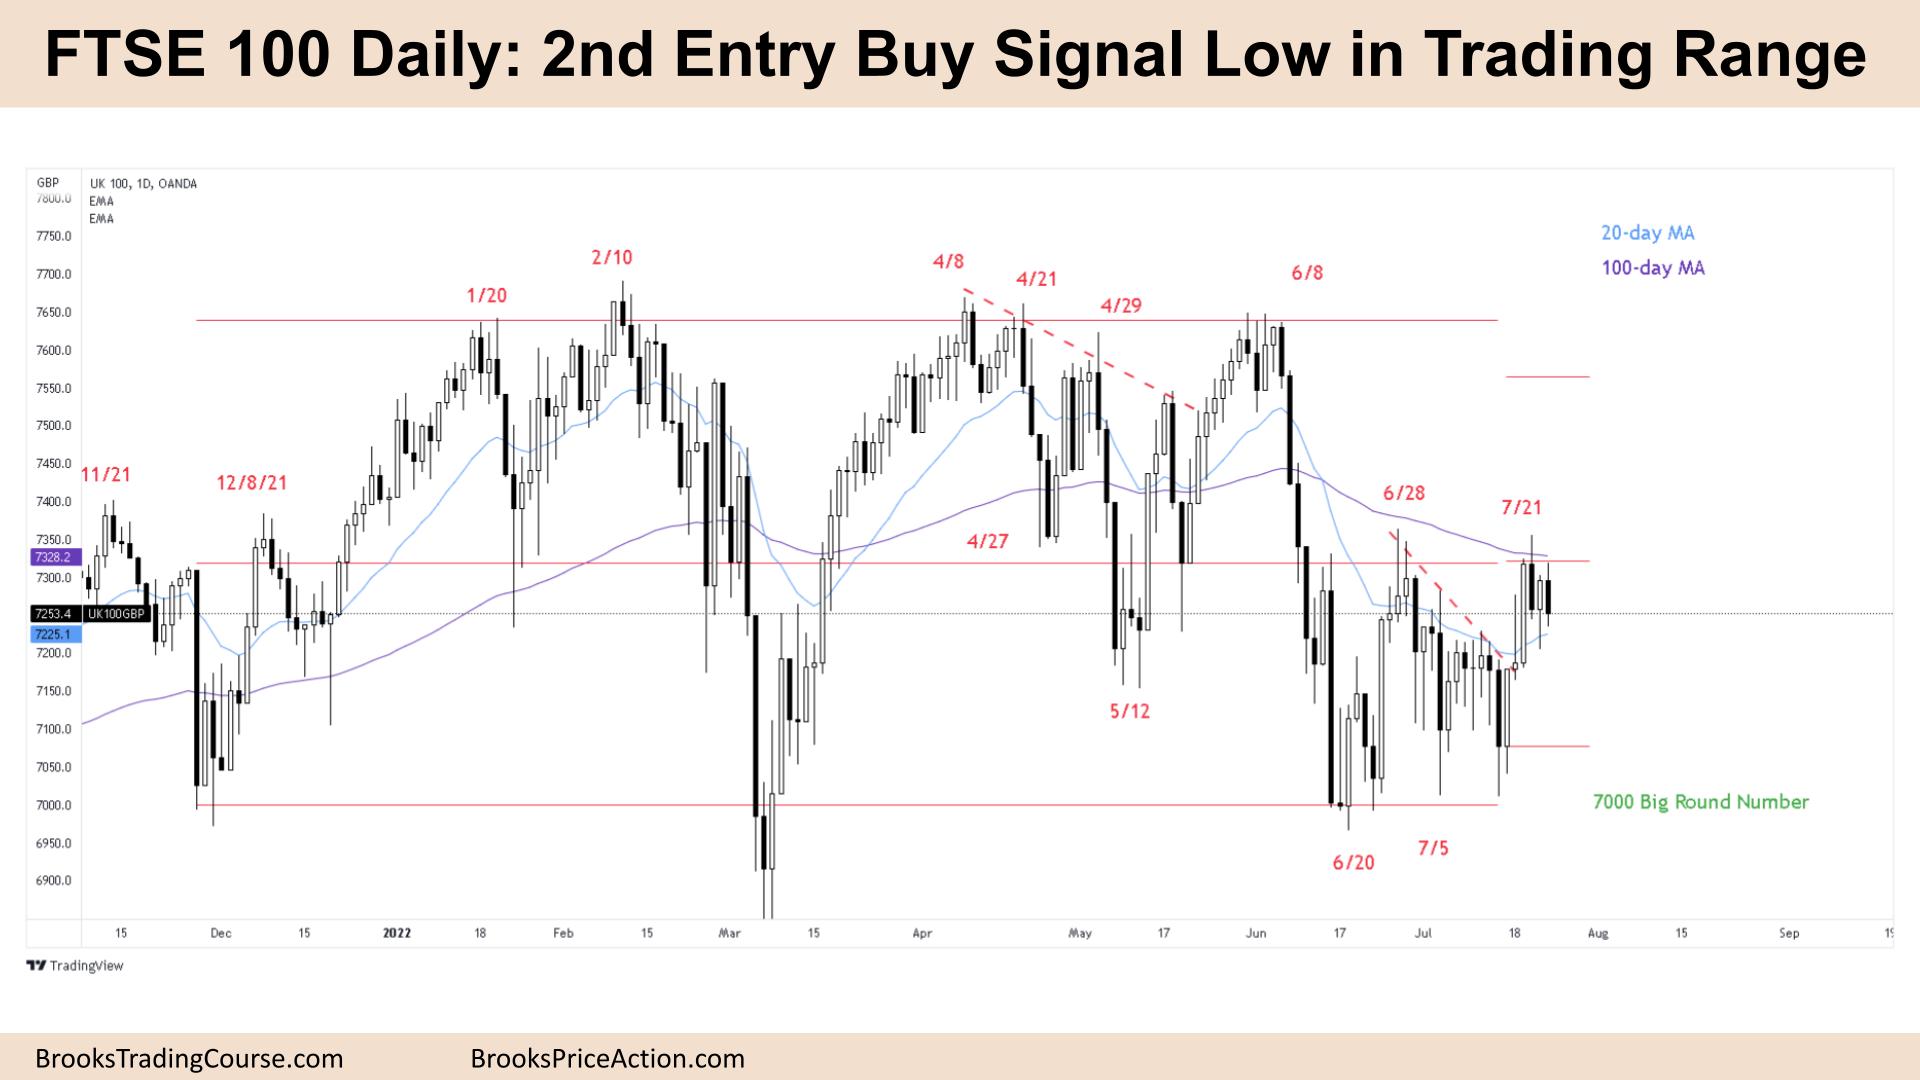 FTSE 100 2nd Entry Buy Signal Low in Trading Range